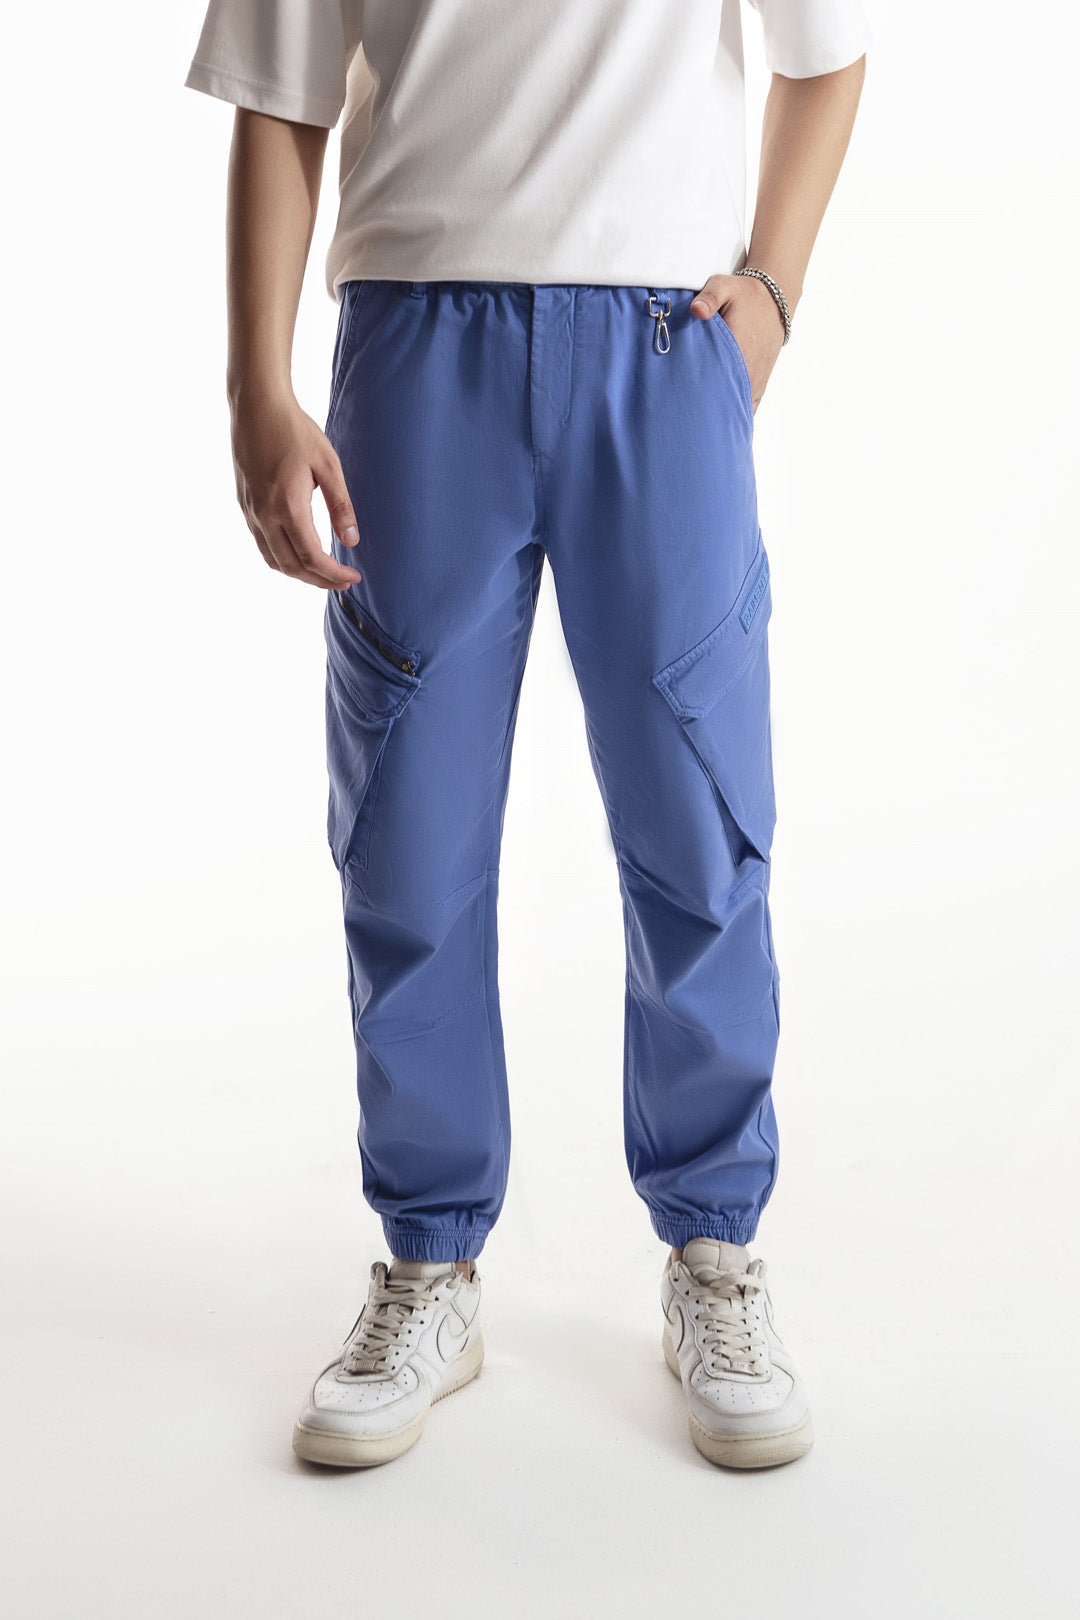 Denim Blue Cargo Pants With Rubber Tag